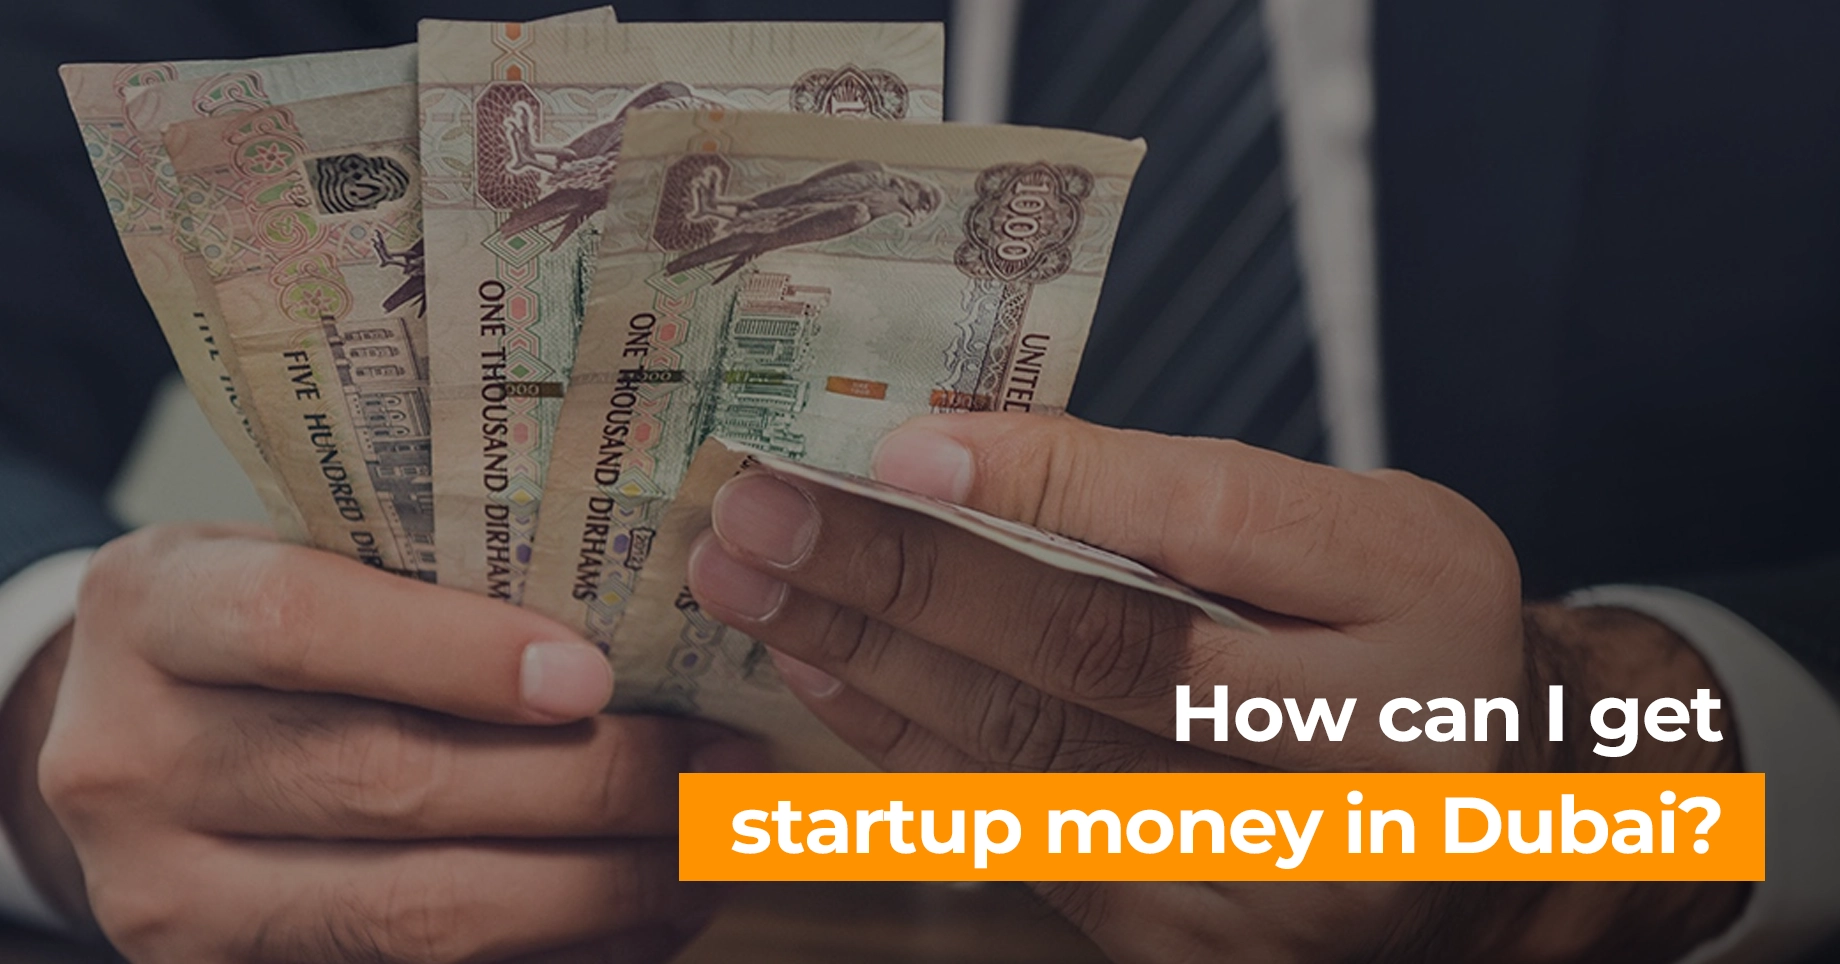 How can I get startup money in Dubai?